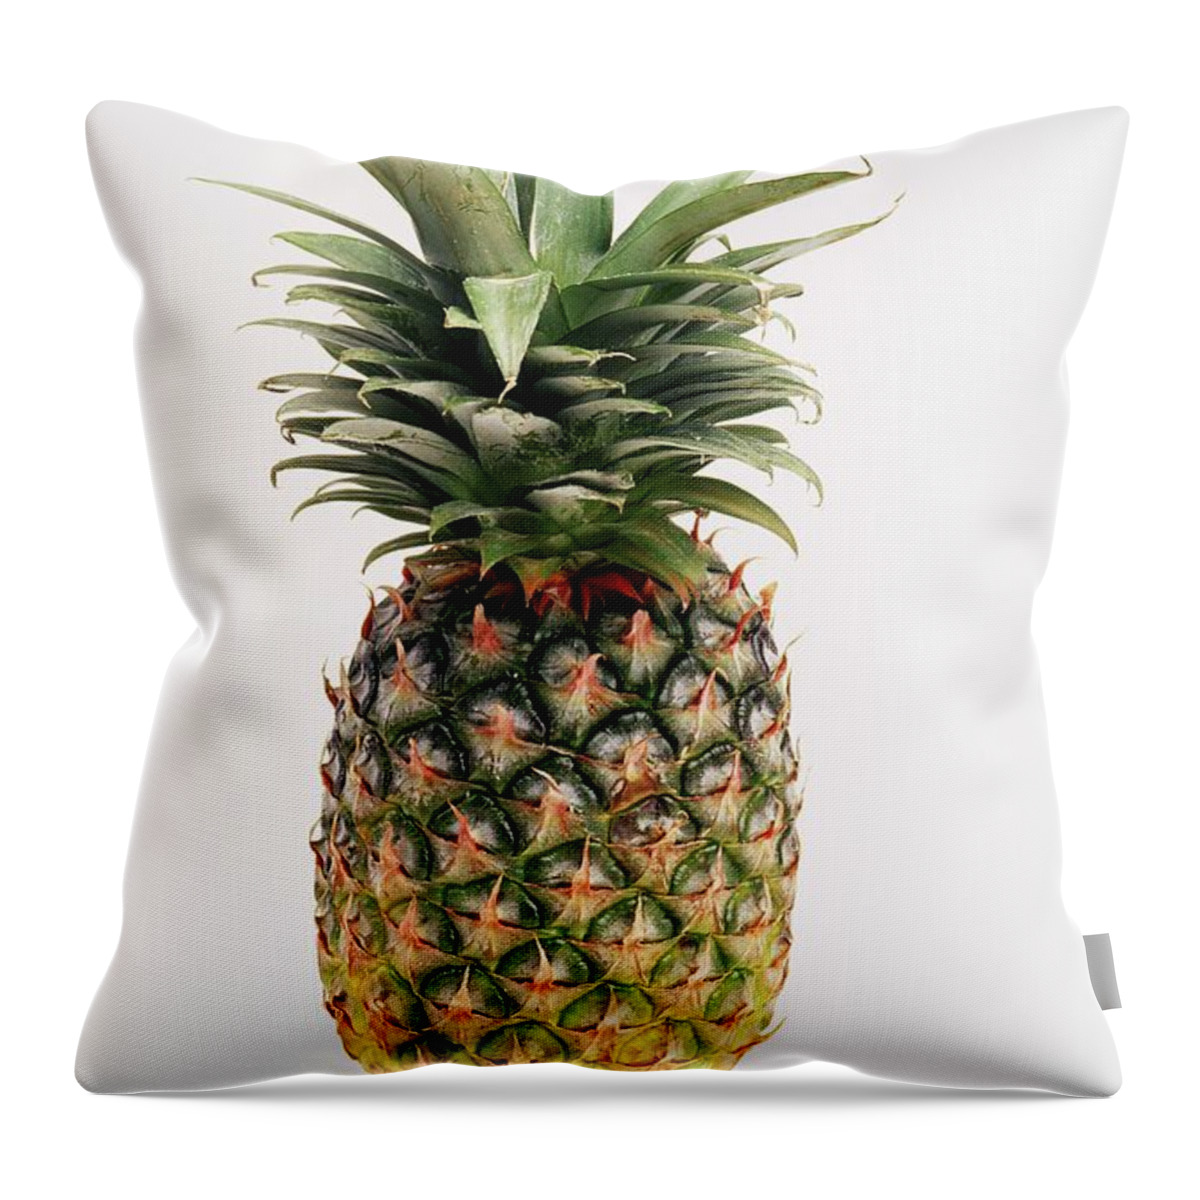 Cutout Throw Pillow featuring the photograph Pineapple by Ron Nickel